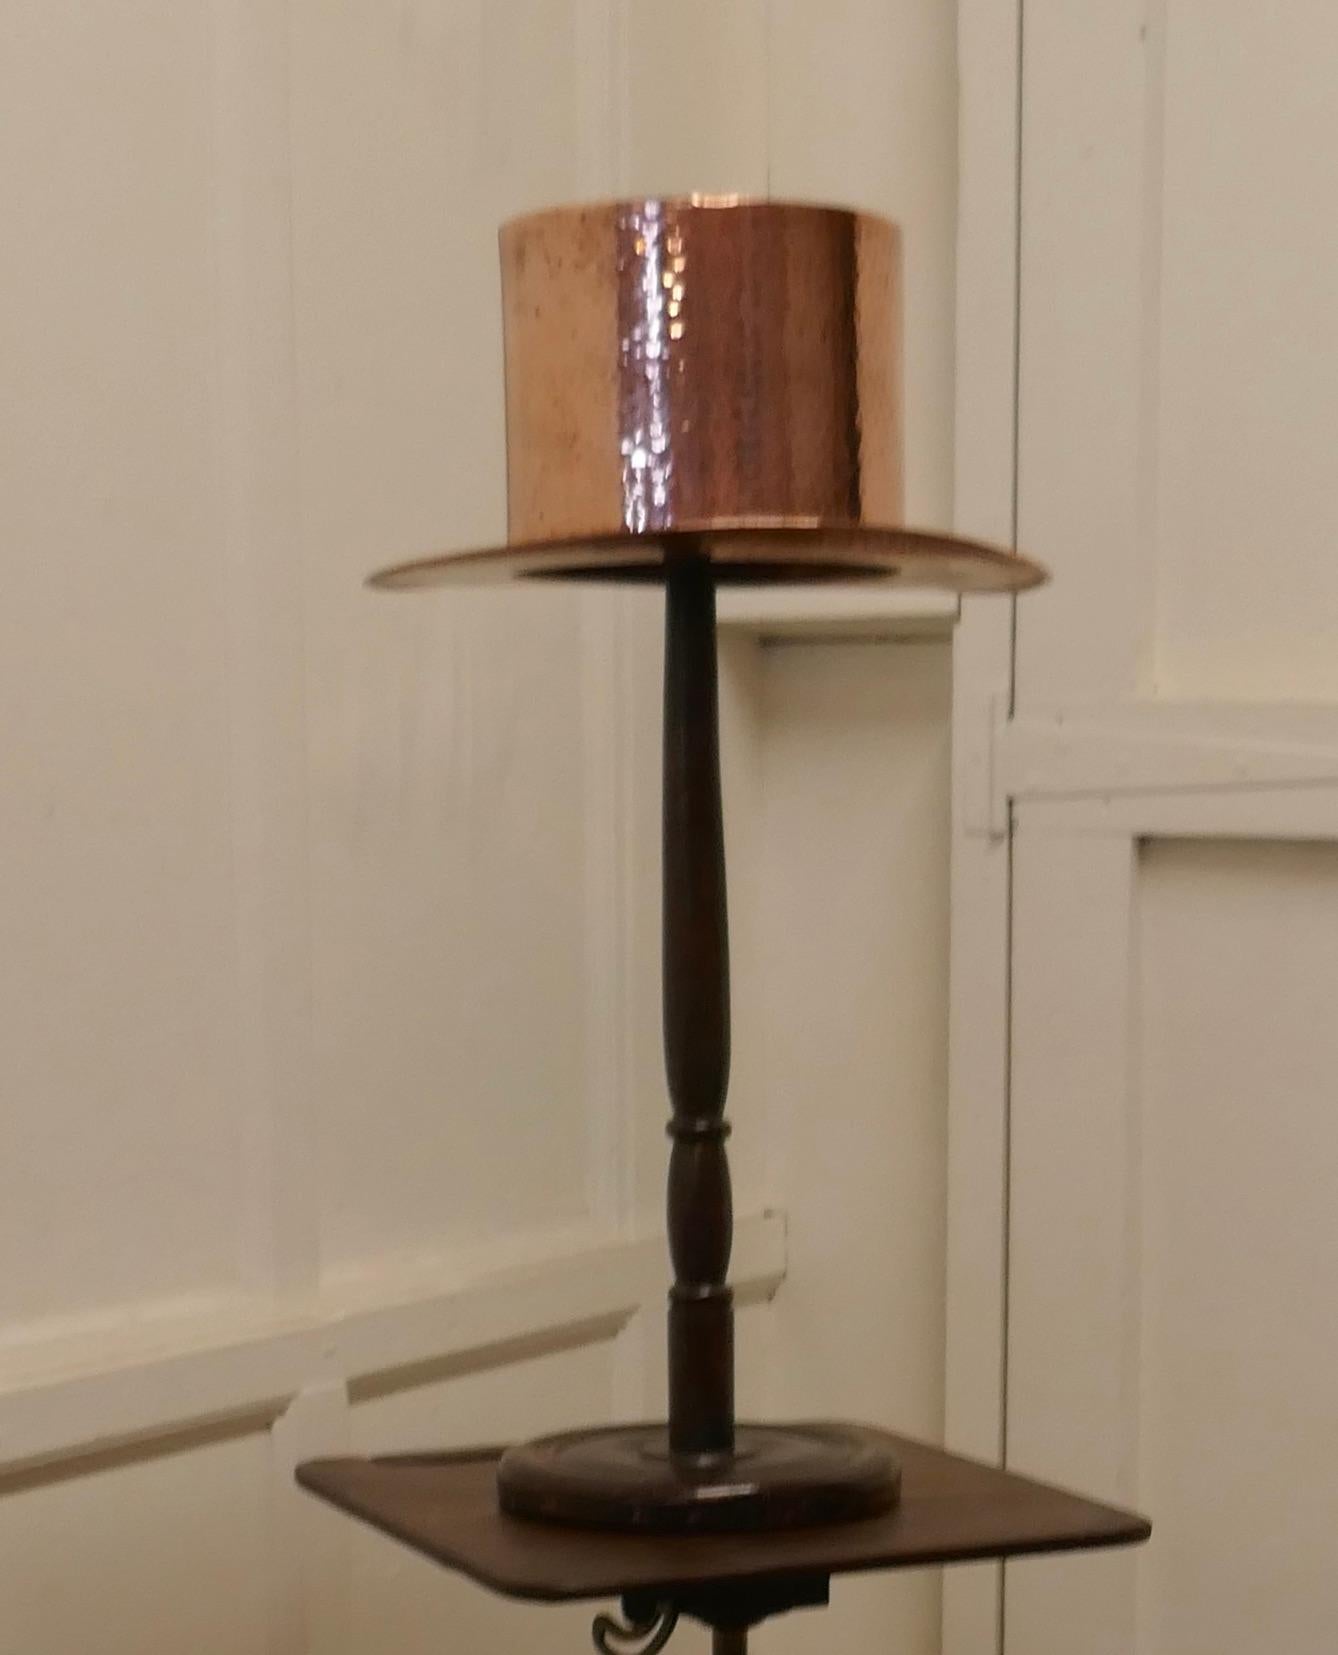 Arts and Crafts Copper Milliners Trade Sign. Copper Top Hat

This is an unusual piece, the Top Hat is made in beaten Copper it sits on an old wooden stand
The hat and stand are both in good all round condition
The hat on the stand is 26” high,